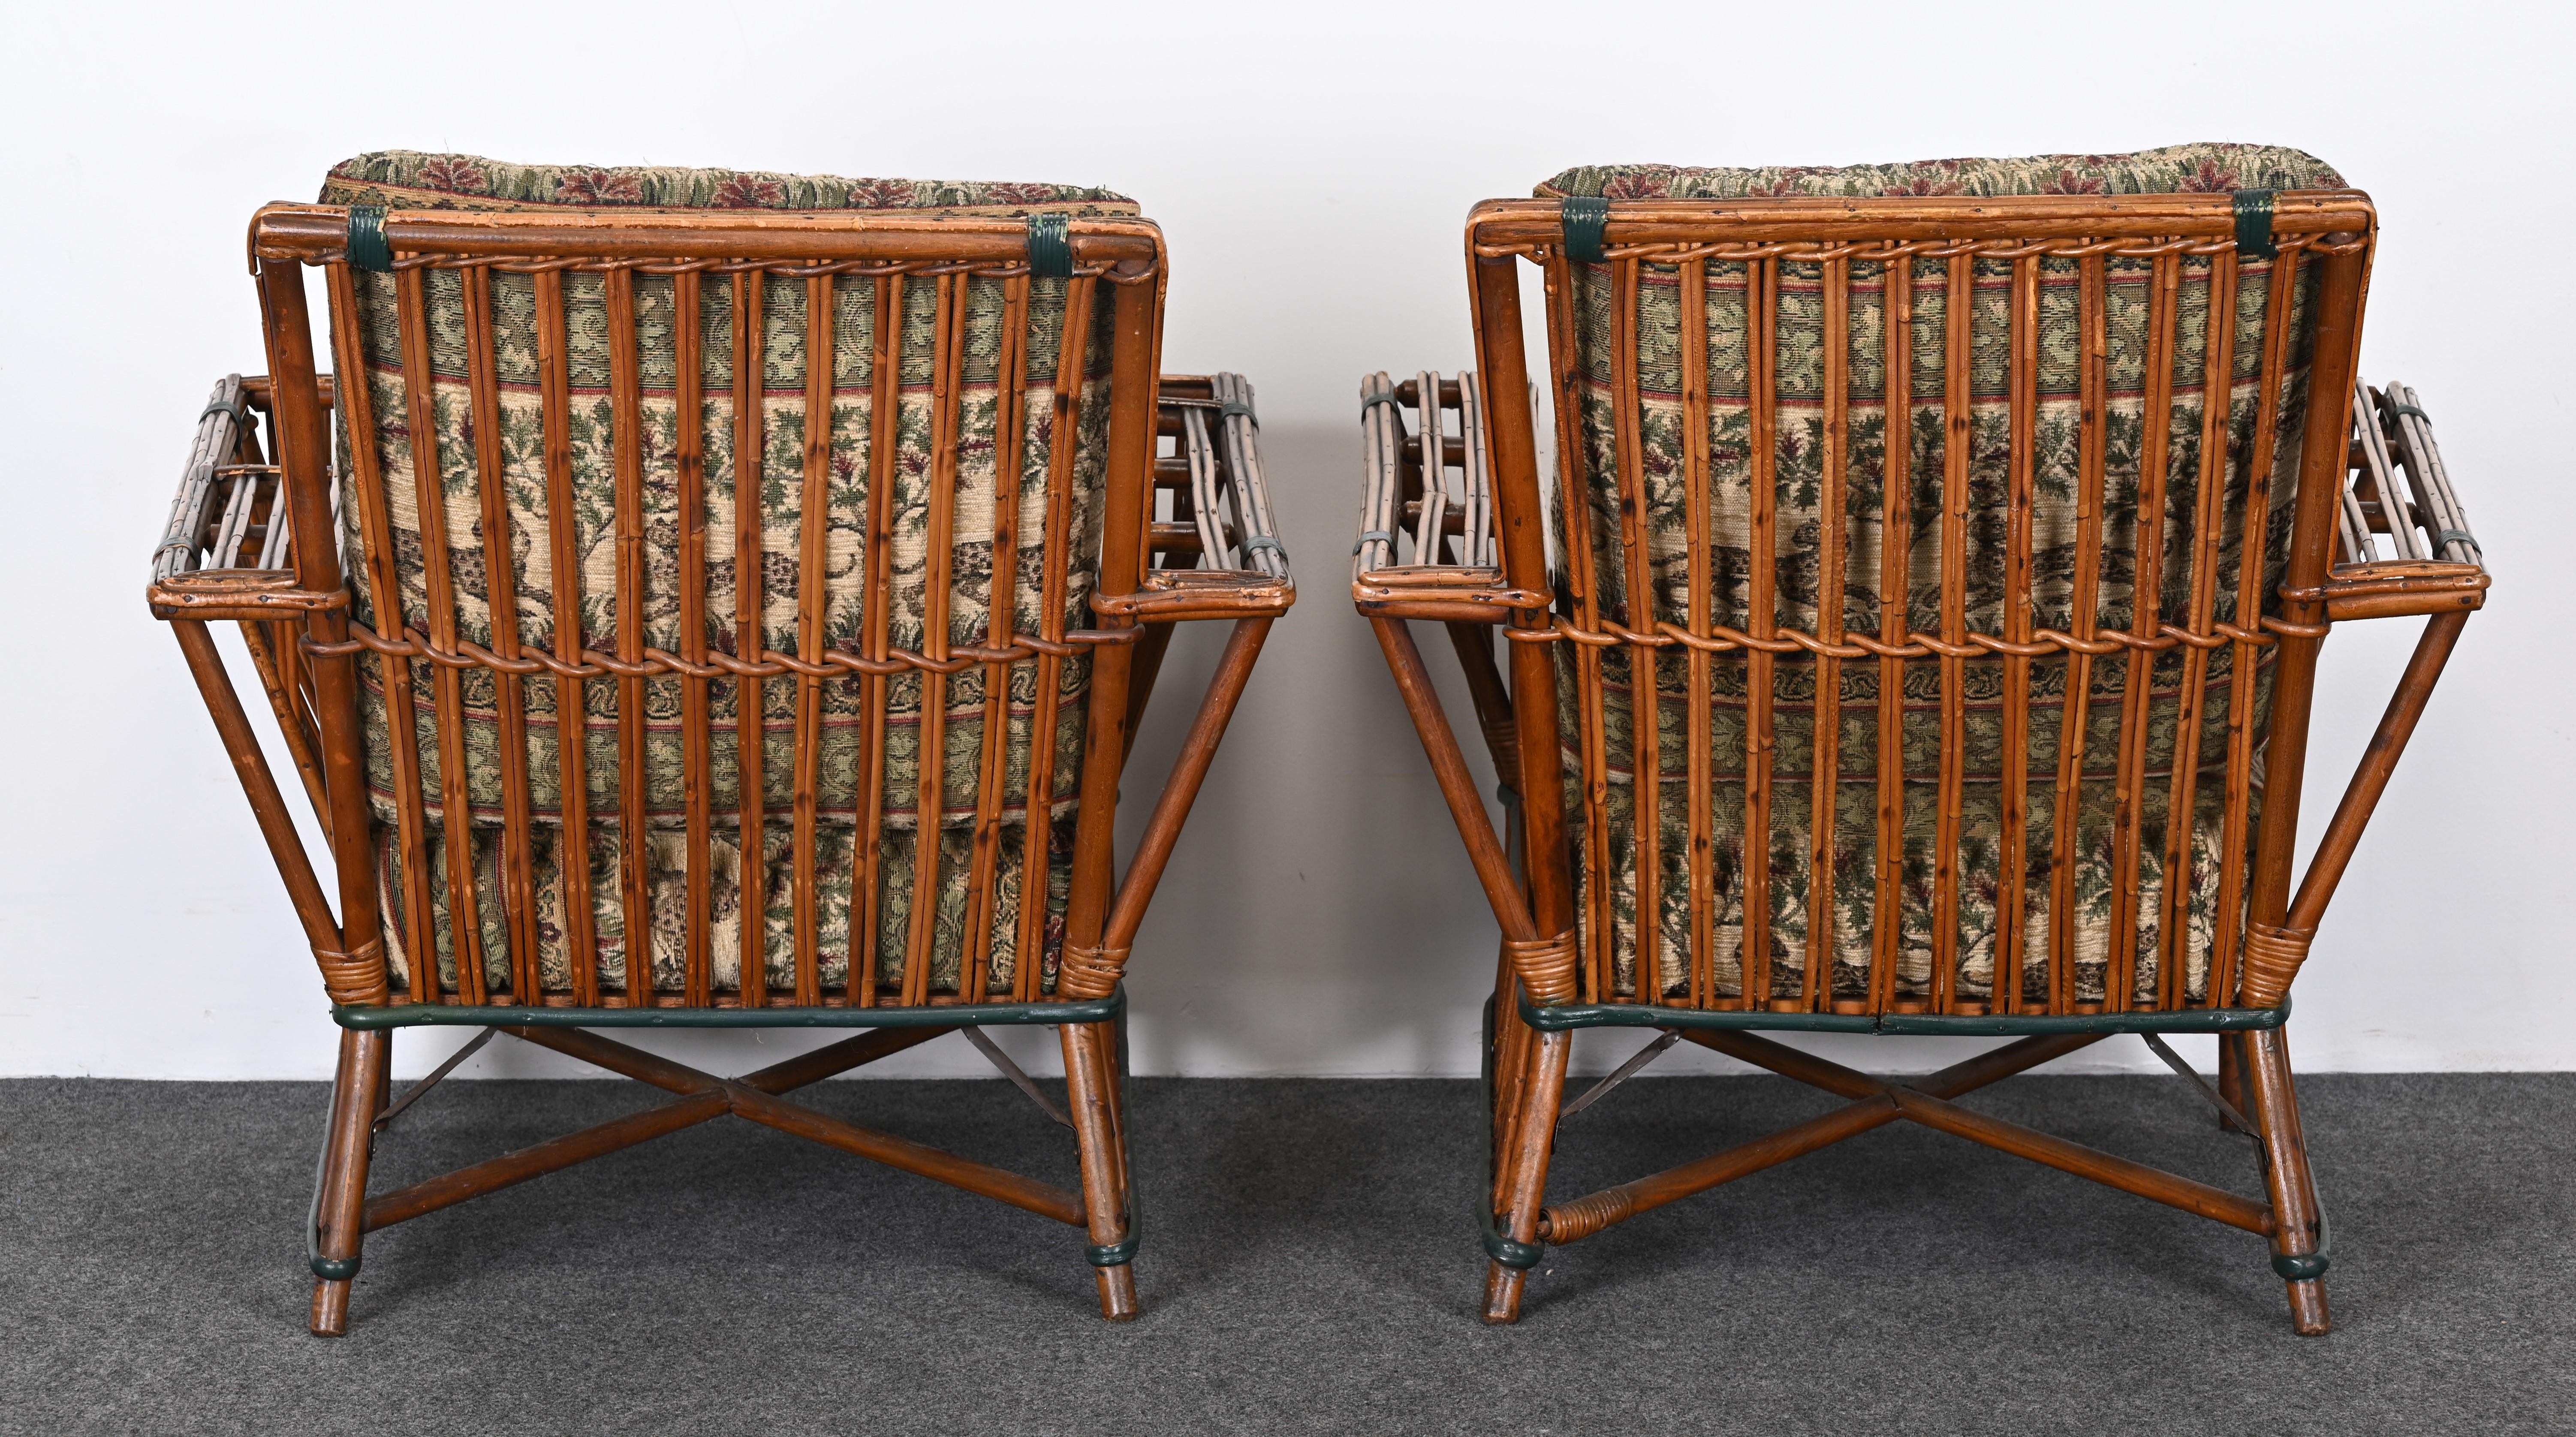 Art Deco Split Ypsilanti Stick Reed Wicker or Sofa with Pair Arm Chairs c. 1930s For Sale 6